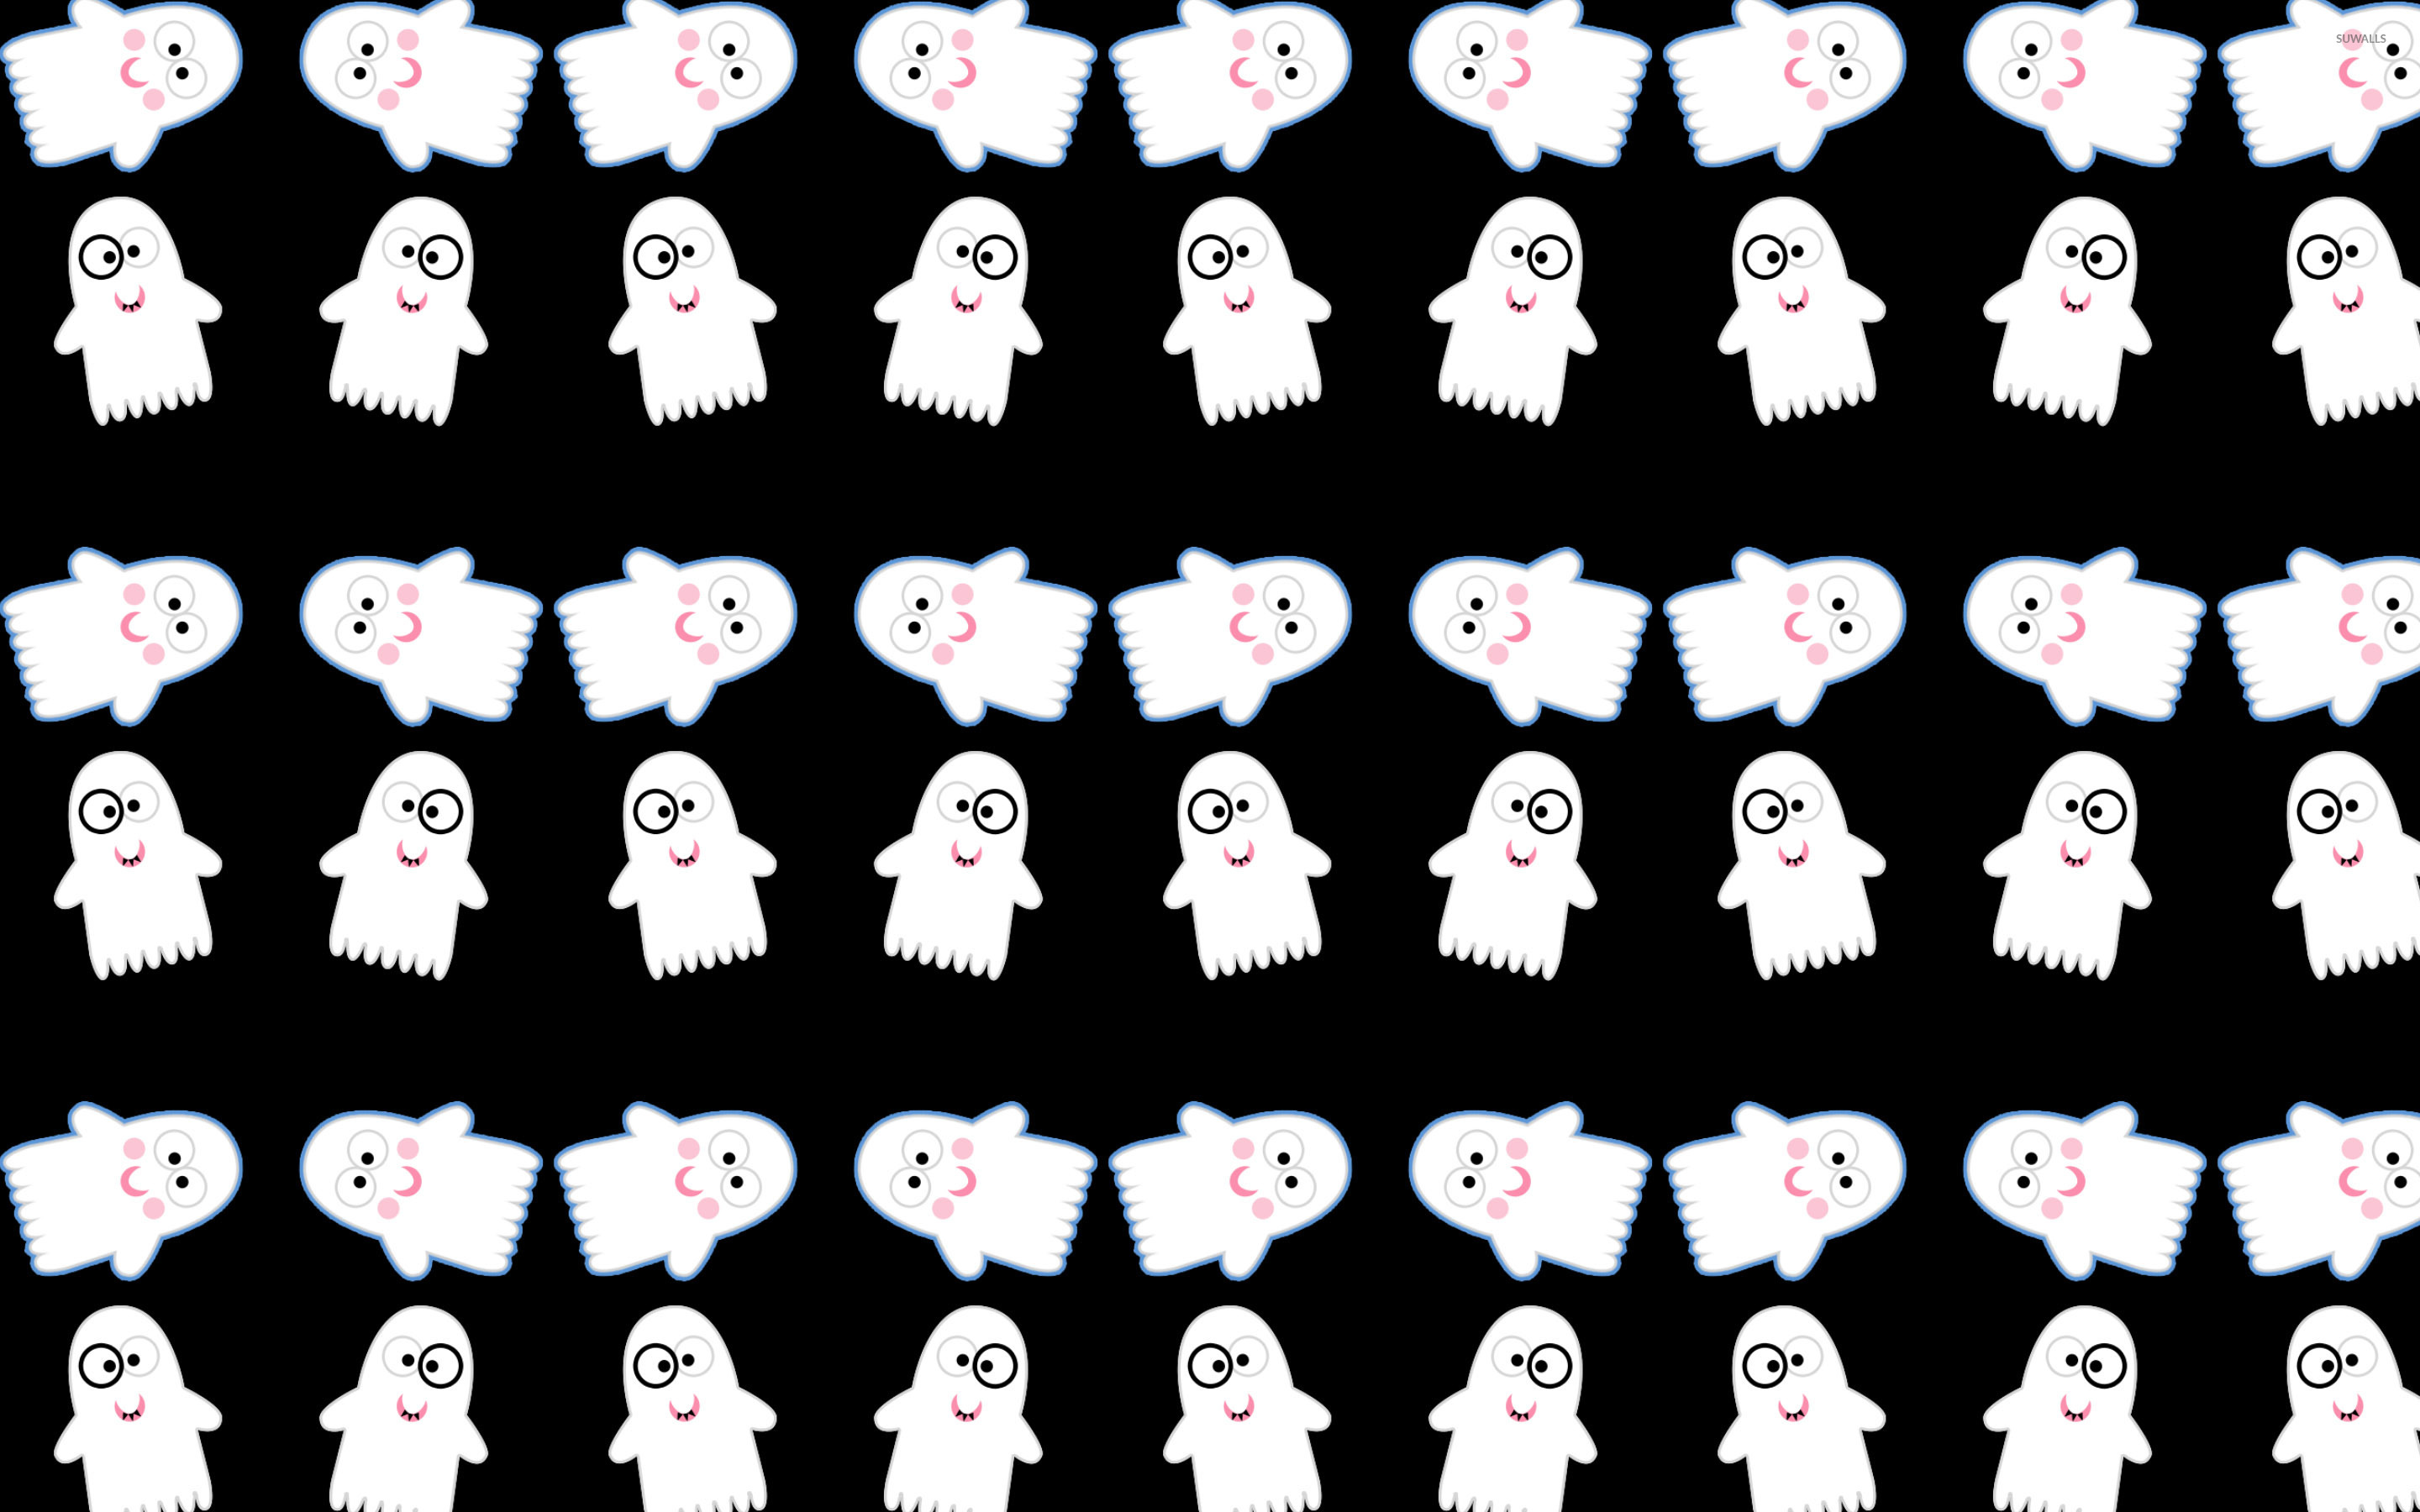 Cute ghost pattern wallpaper - Holiday wallpapers - #24315